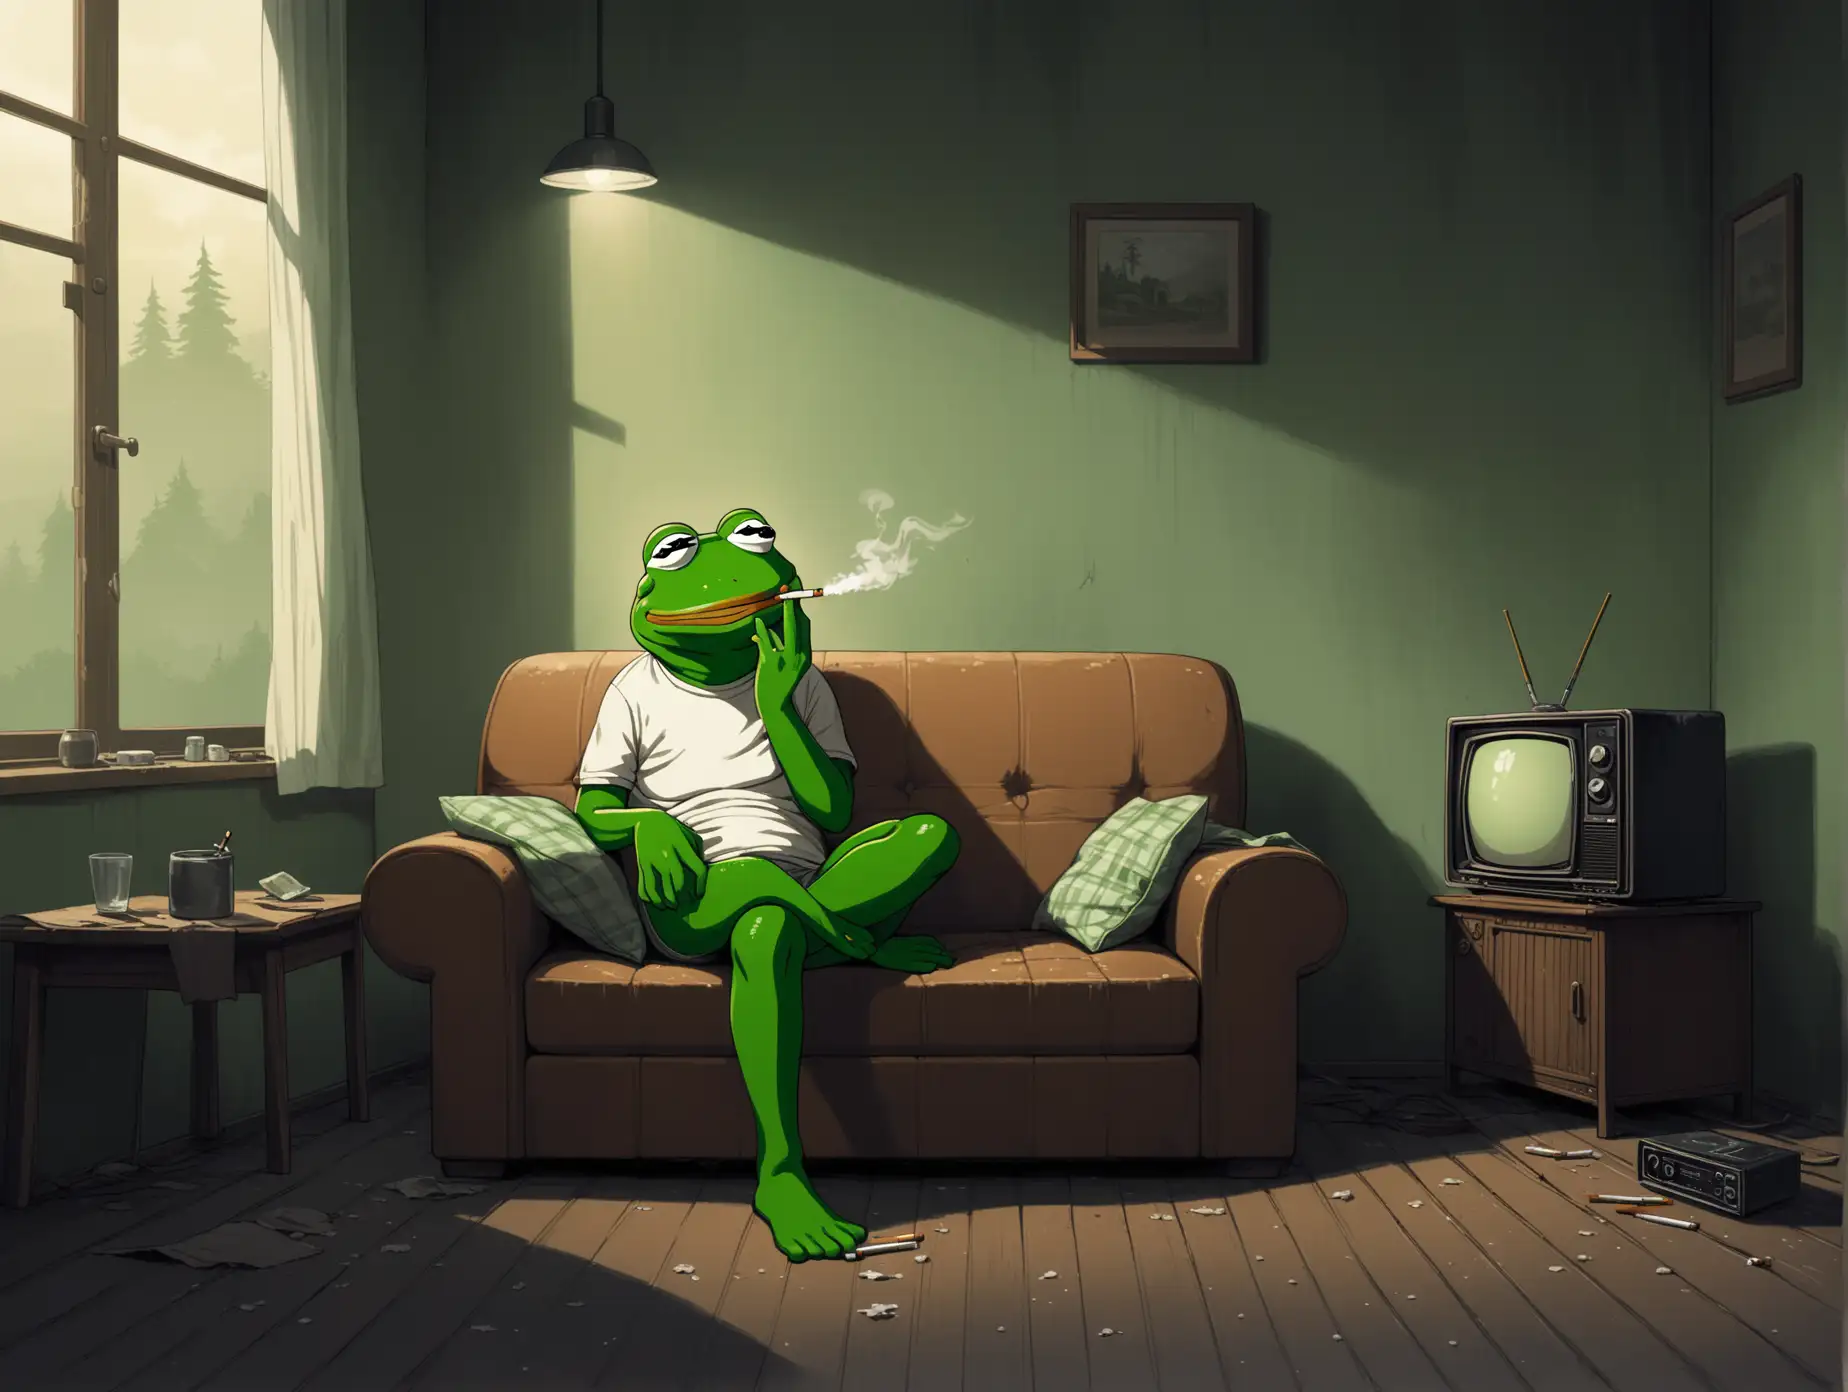 Lonely Pepe the Frog Smoking Cigarette at Home in Gloomy Atmosphere